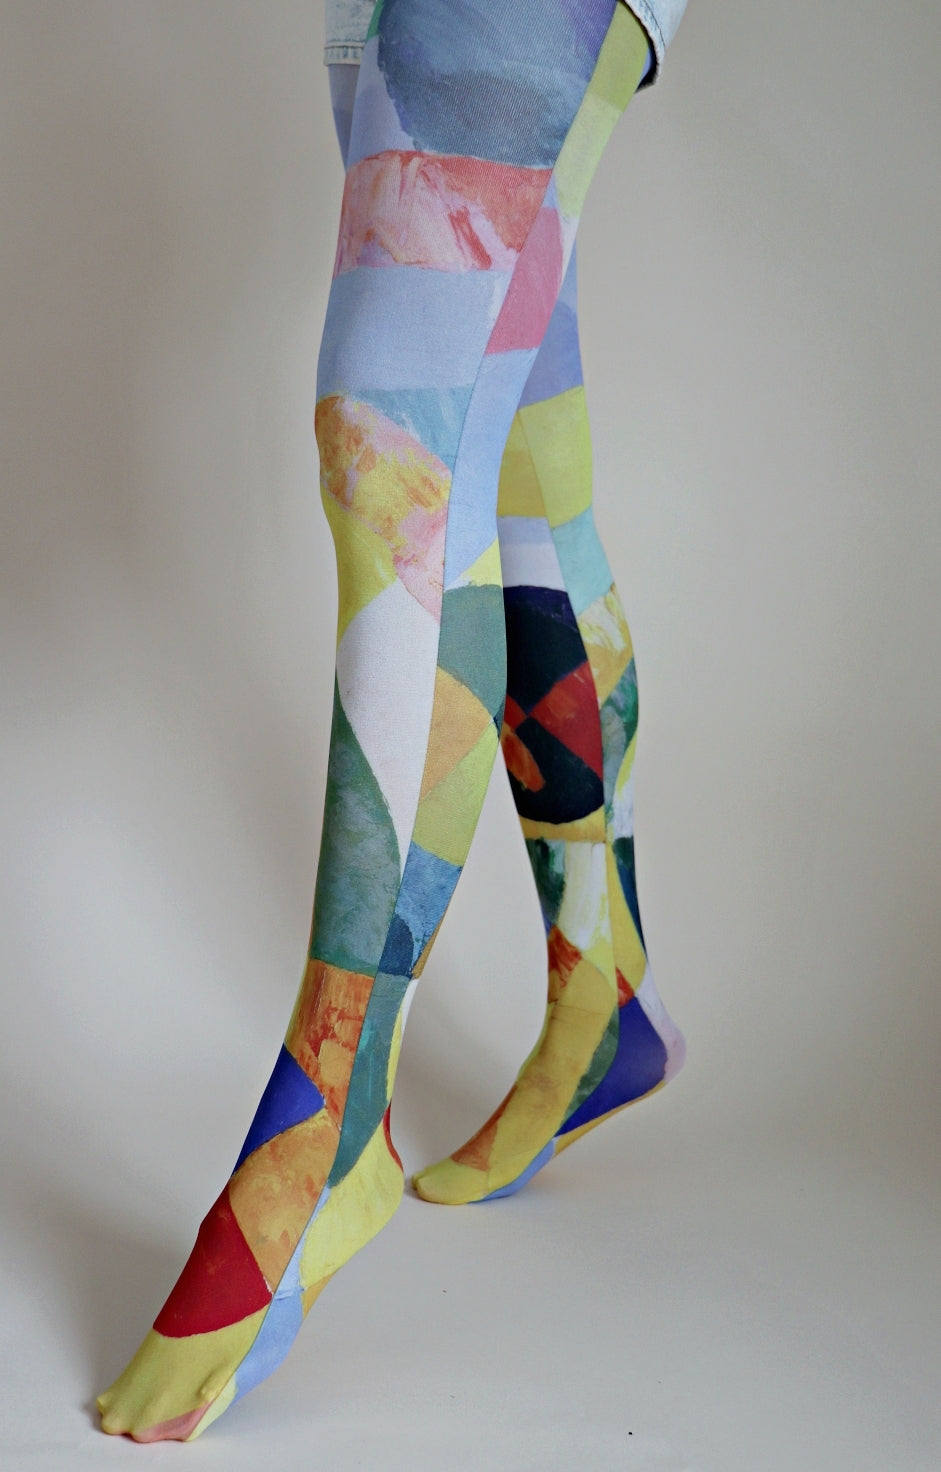 Tights inspired by the work Circular Forms by Robert Delaunay of the TABBISOCKS brand, with the colors light blue, red, blue, green, pink and other geometric patterns on the legs of a woman wearing